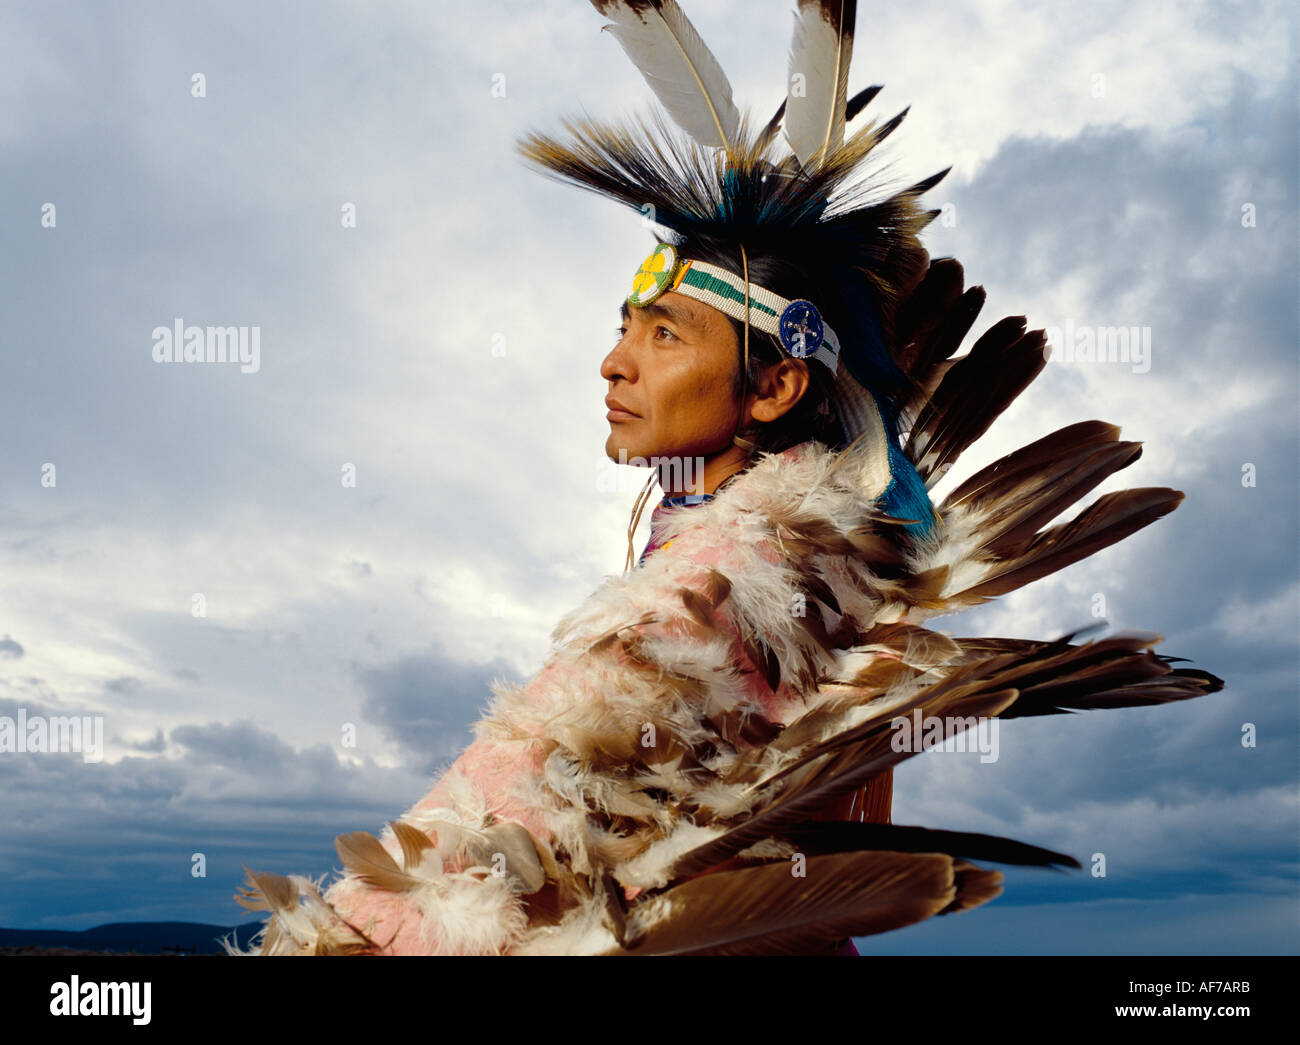 Native American man in traqditional feather headdress. Outdoor portrait profile. Stock Photo